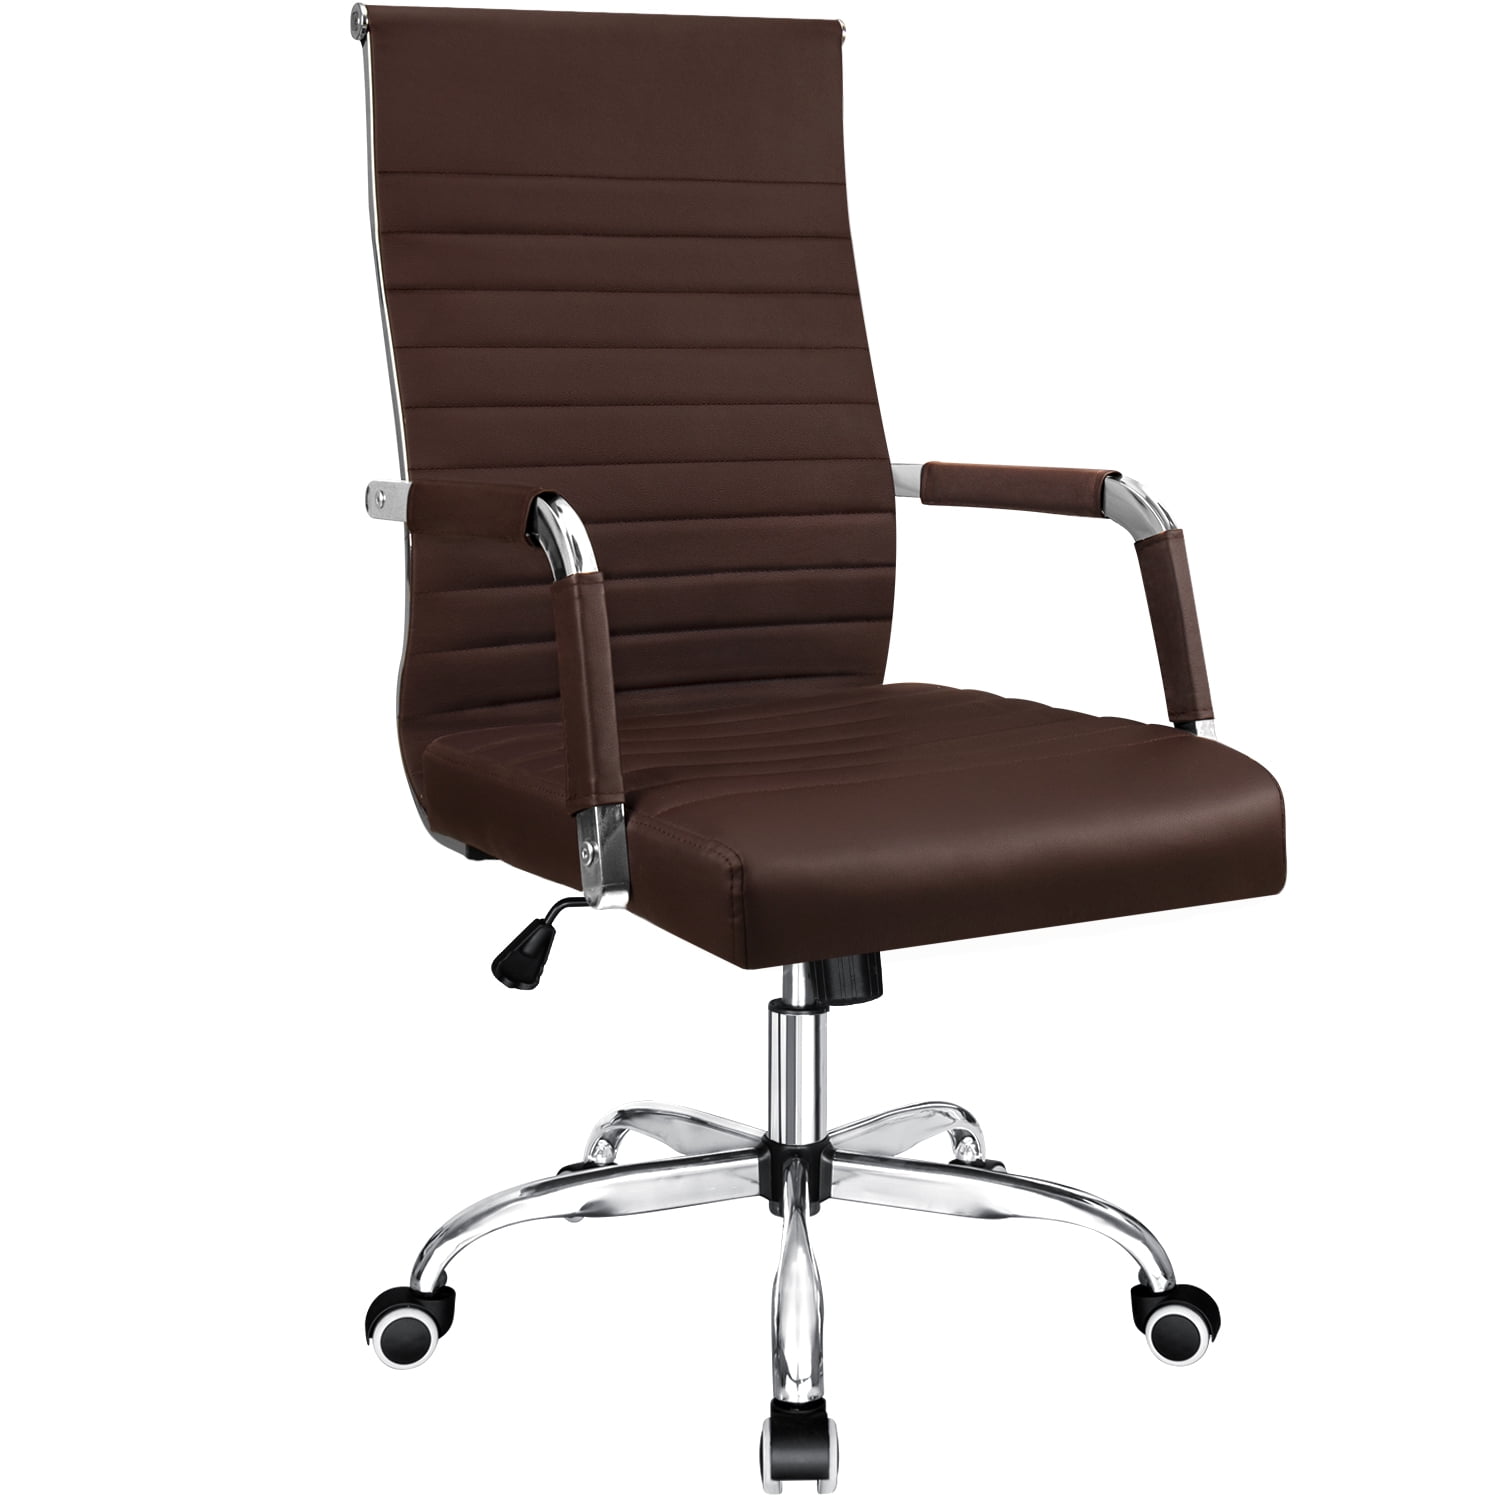 Furmax Ribbed Office Desk Mid-Back PU Leather Executive